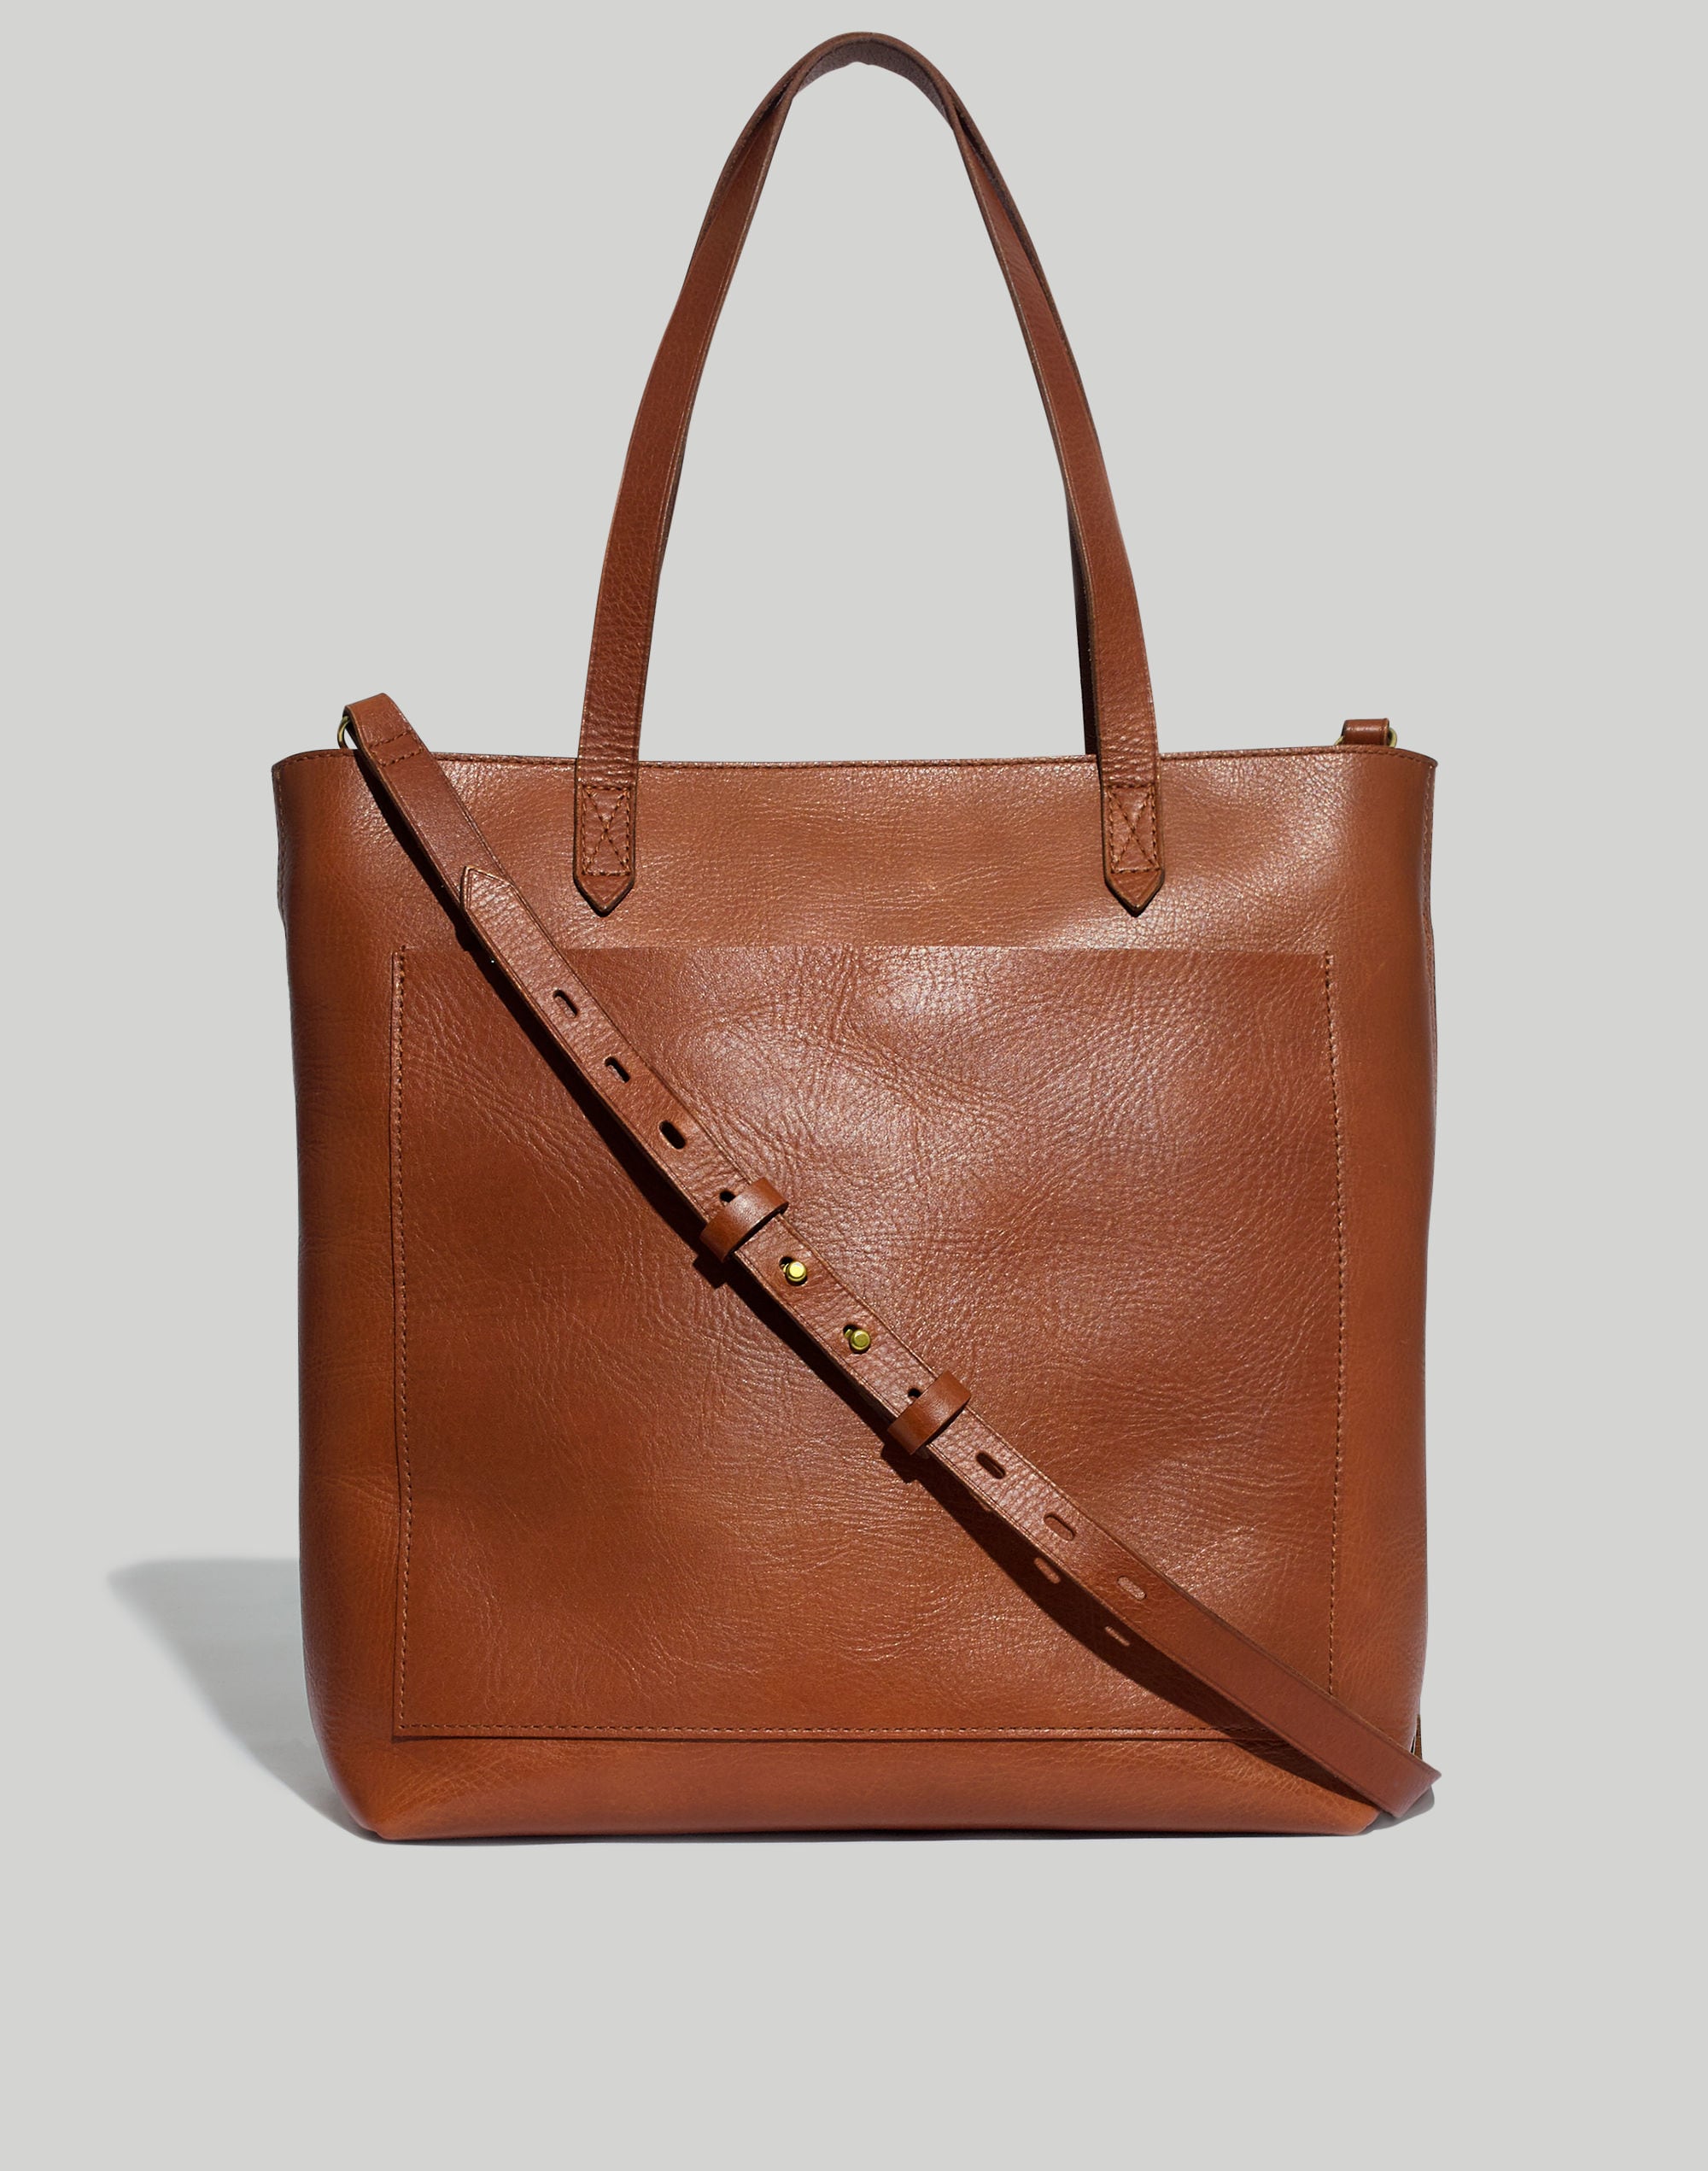 Madewell The Zip-Top Medium Transport Leather Tote